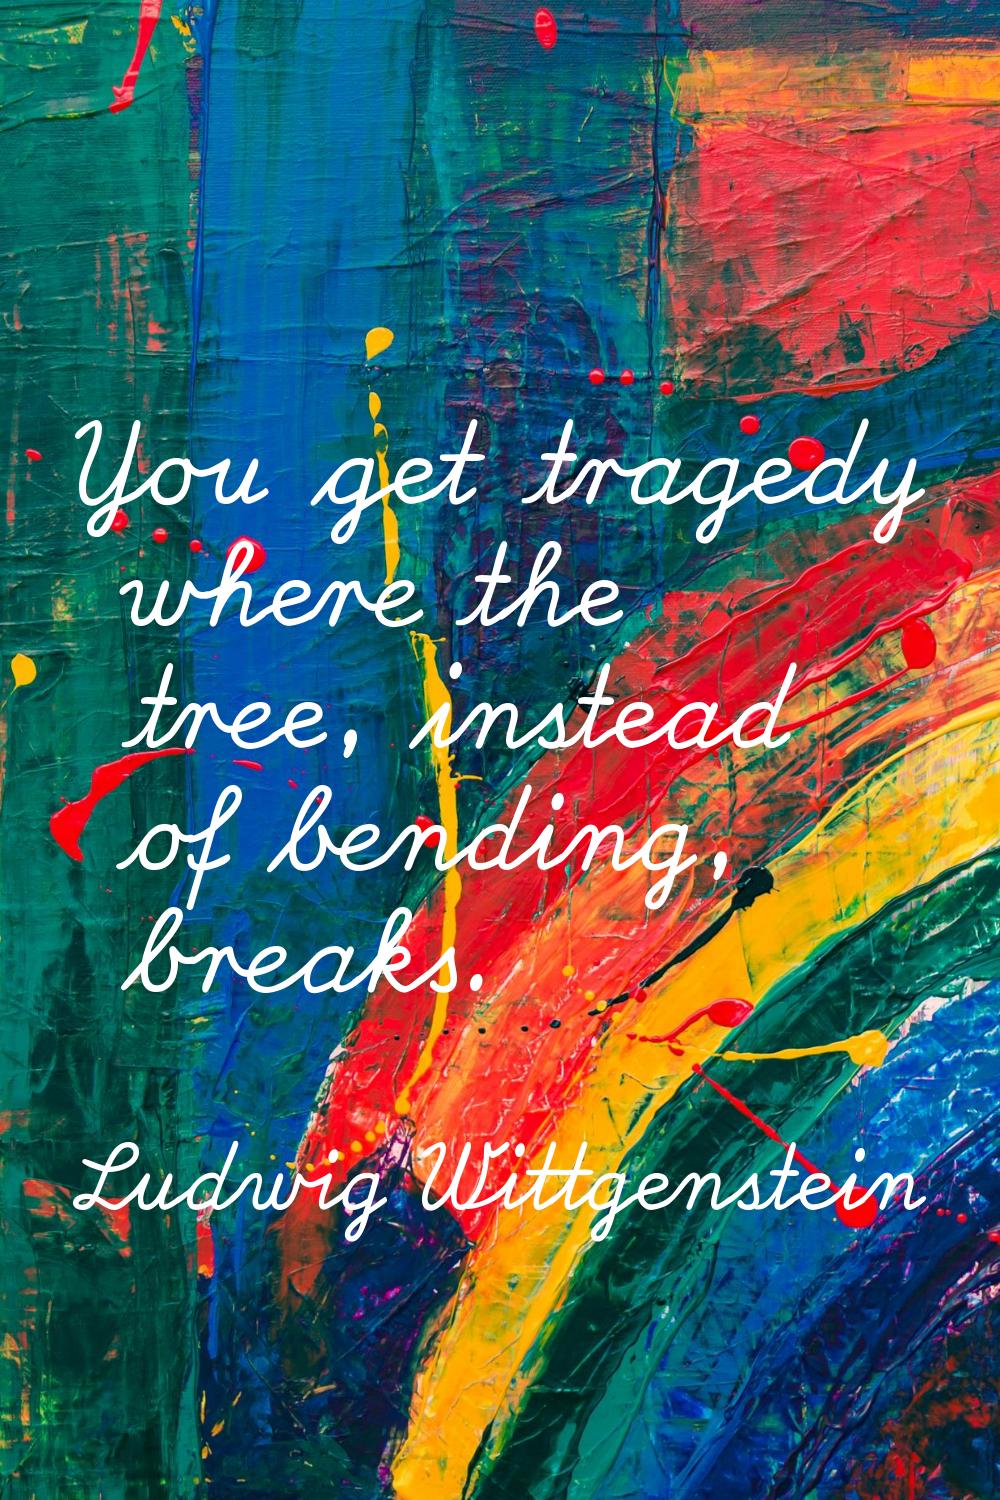 You get tragedy where the tree, instead of bending, breaks.